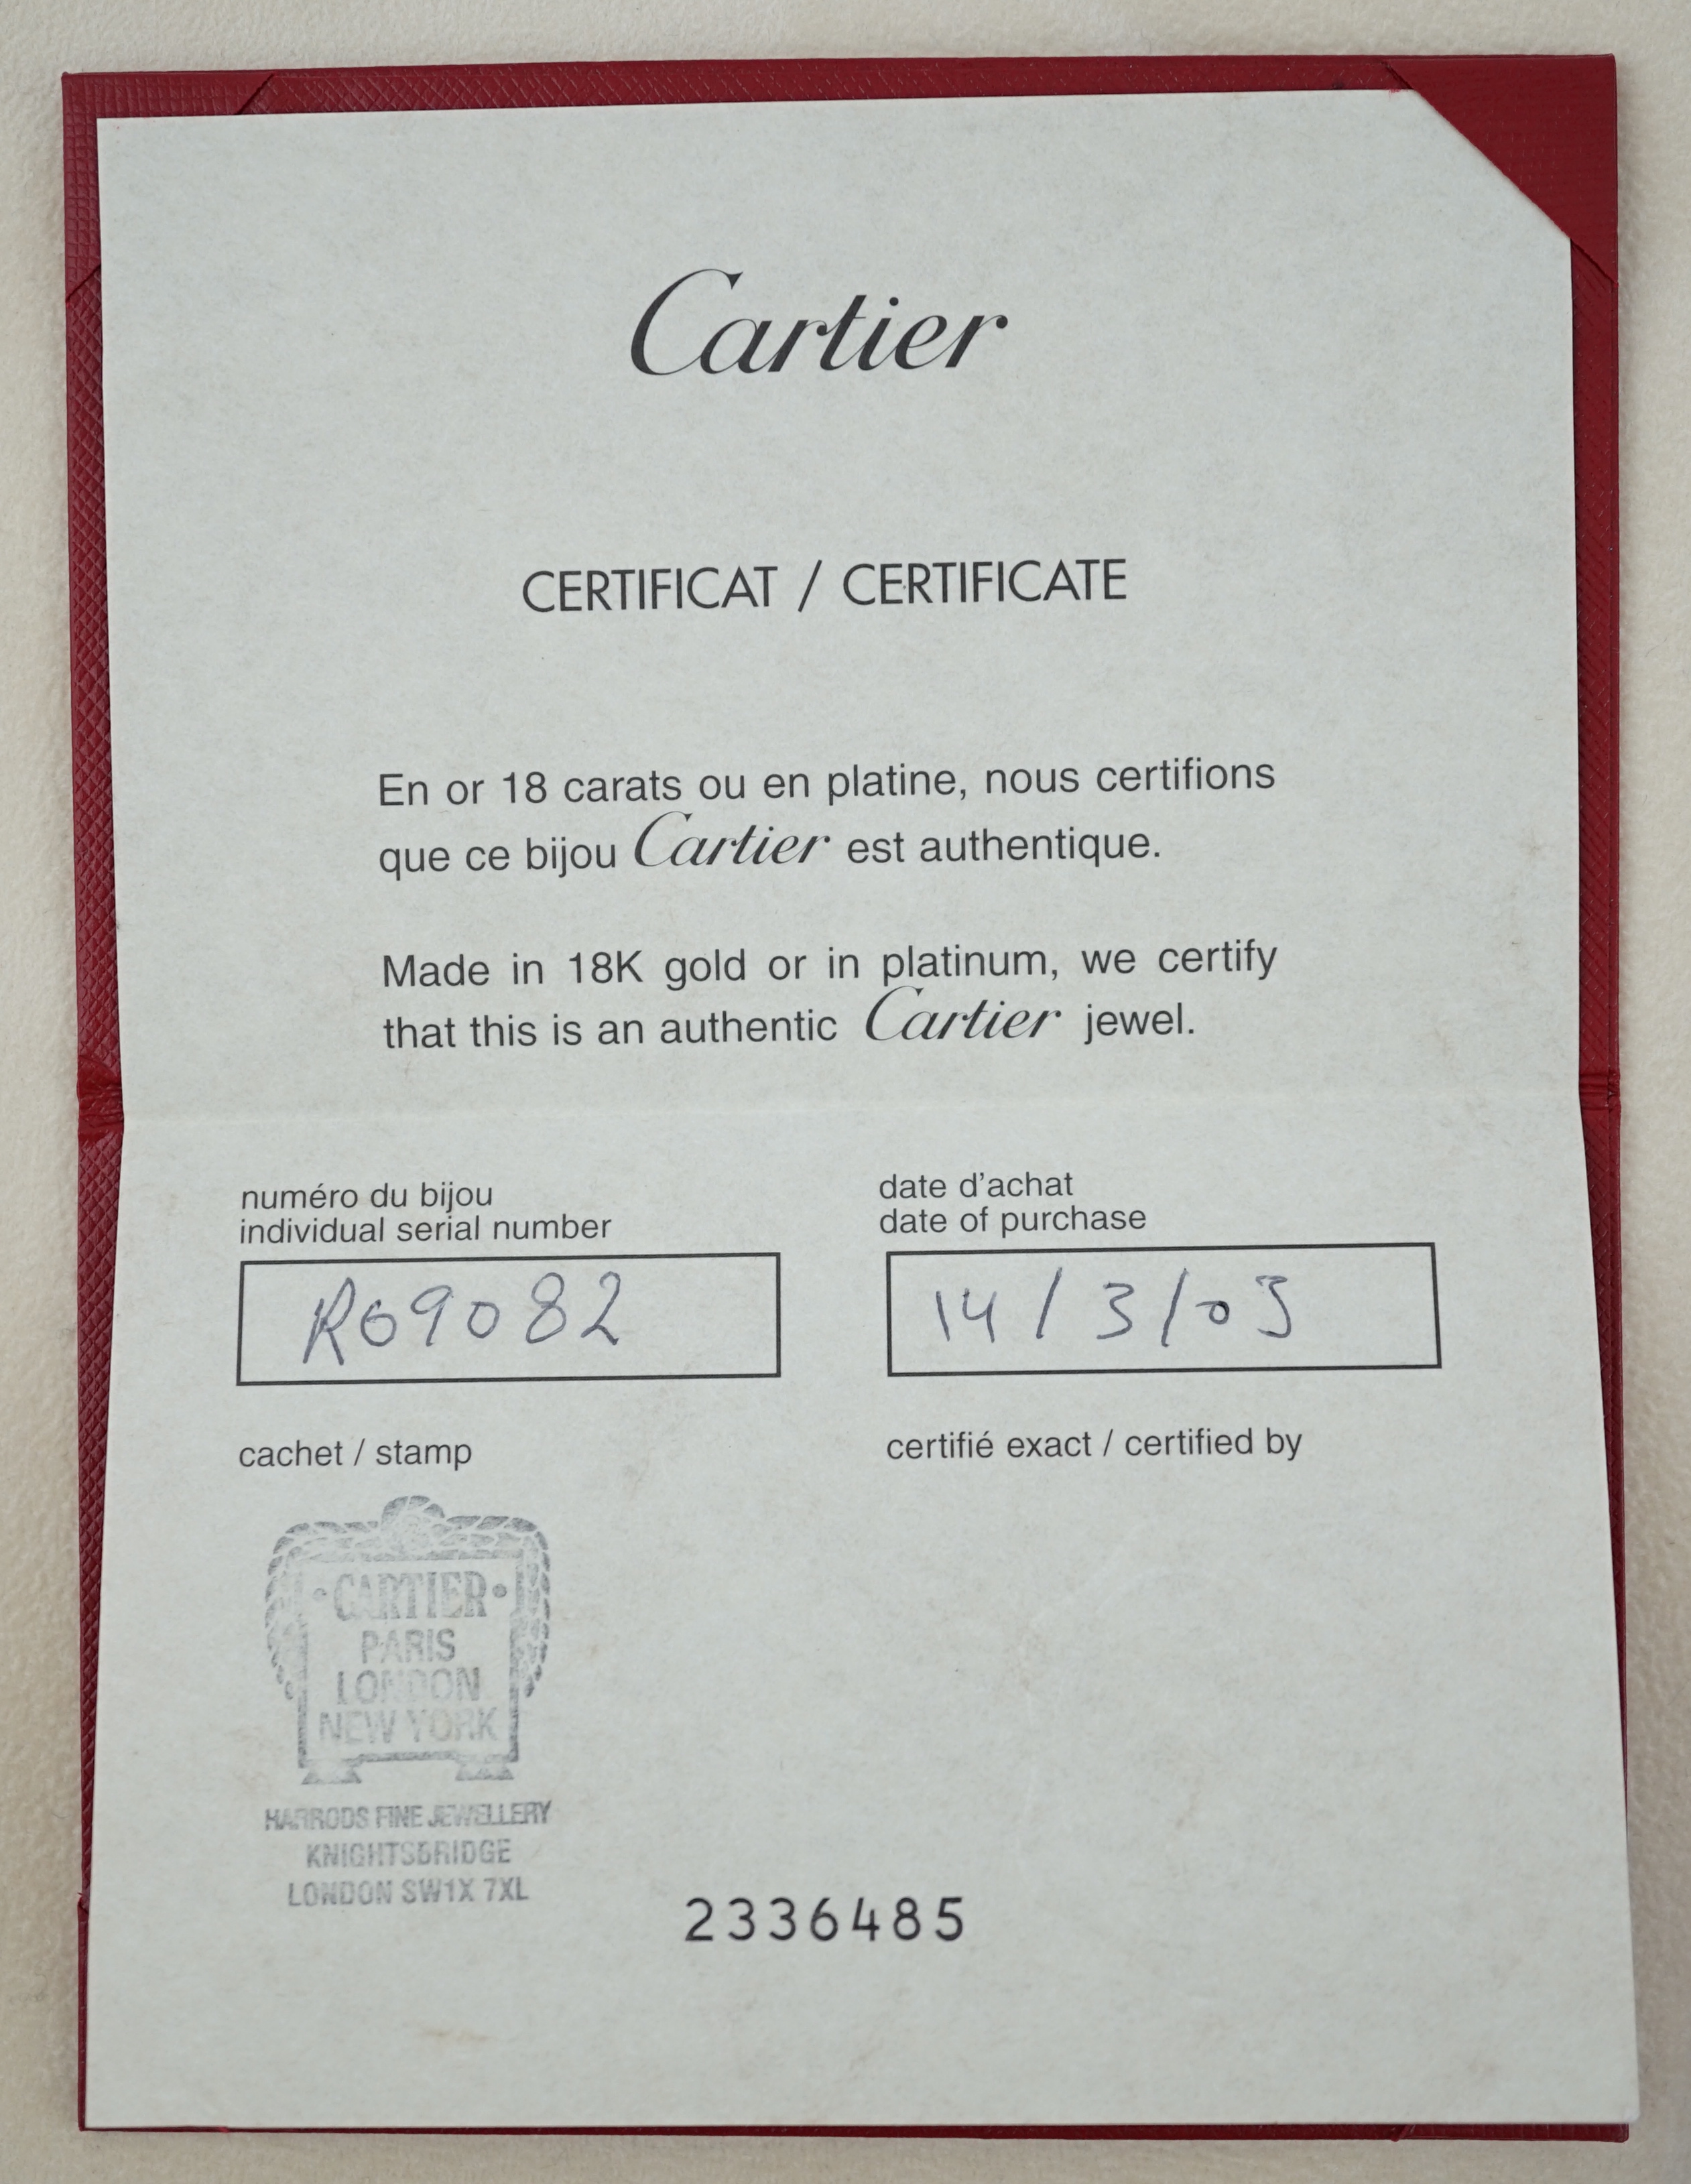 A modern Cartier 18ct white gold and diamond line choker necklace, with Cartier box and certificate dated 14/3/03